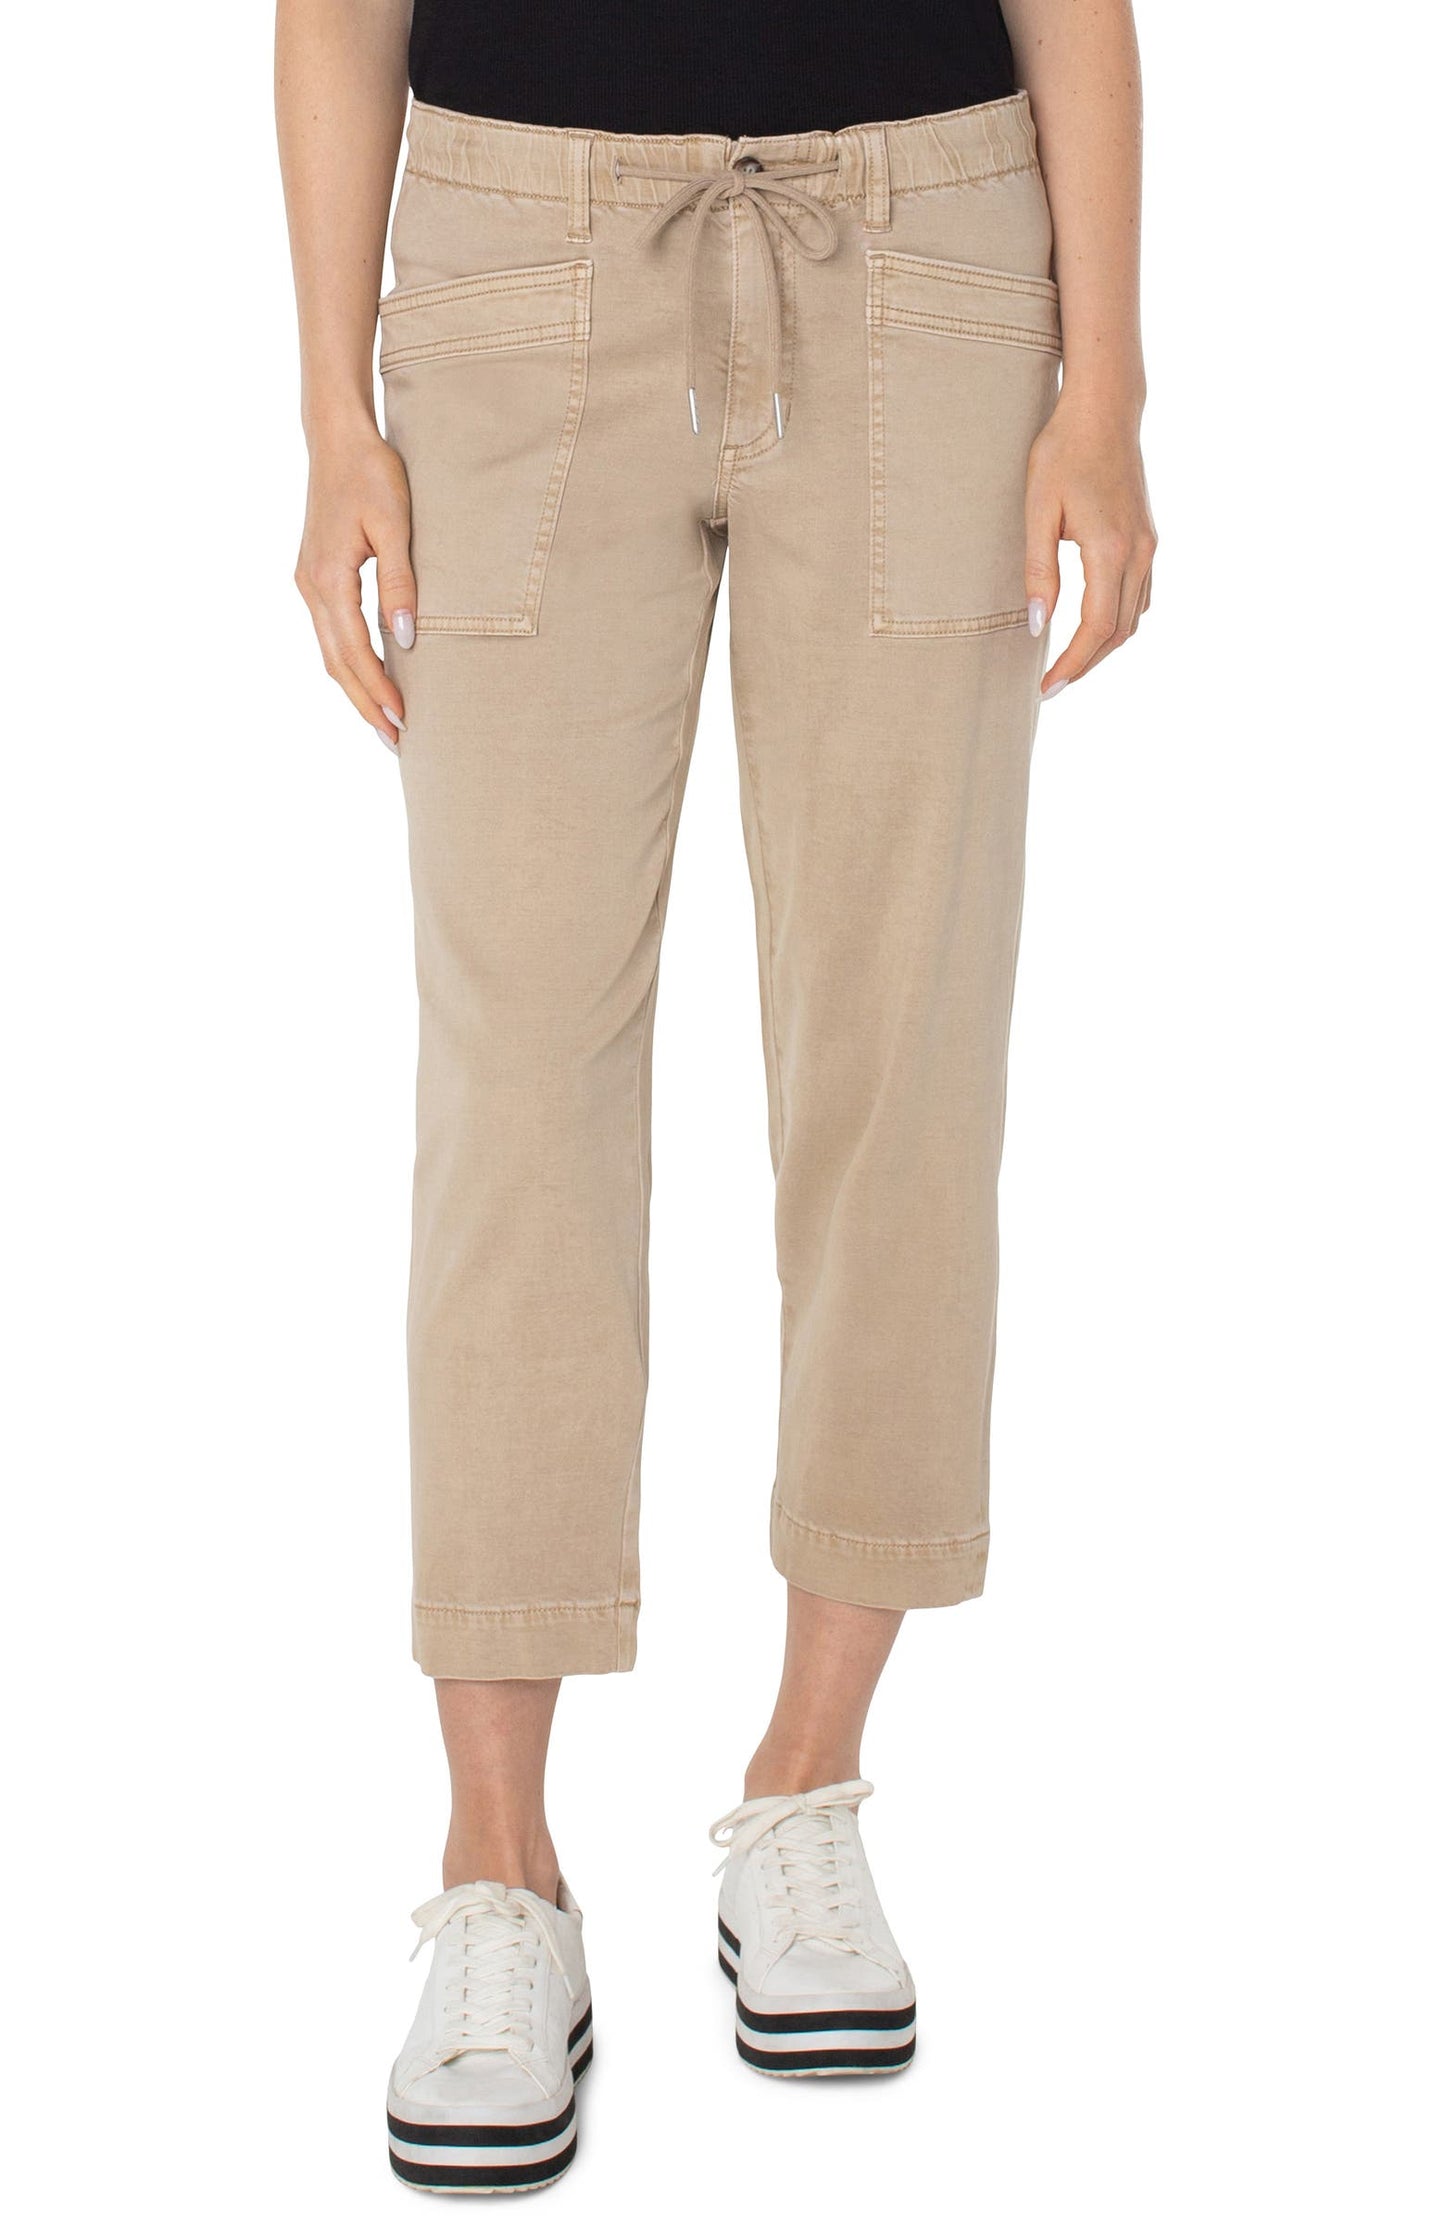 Rascal Pants with Patch Pockets - Biscuit Tan